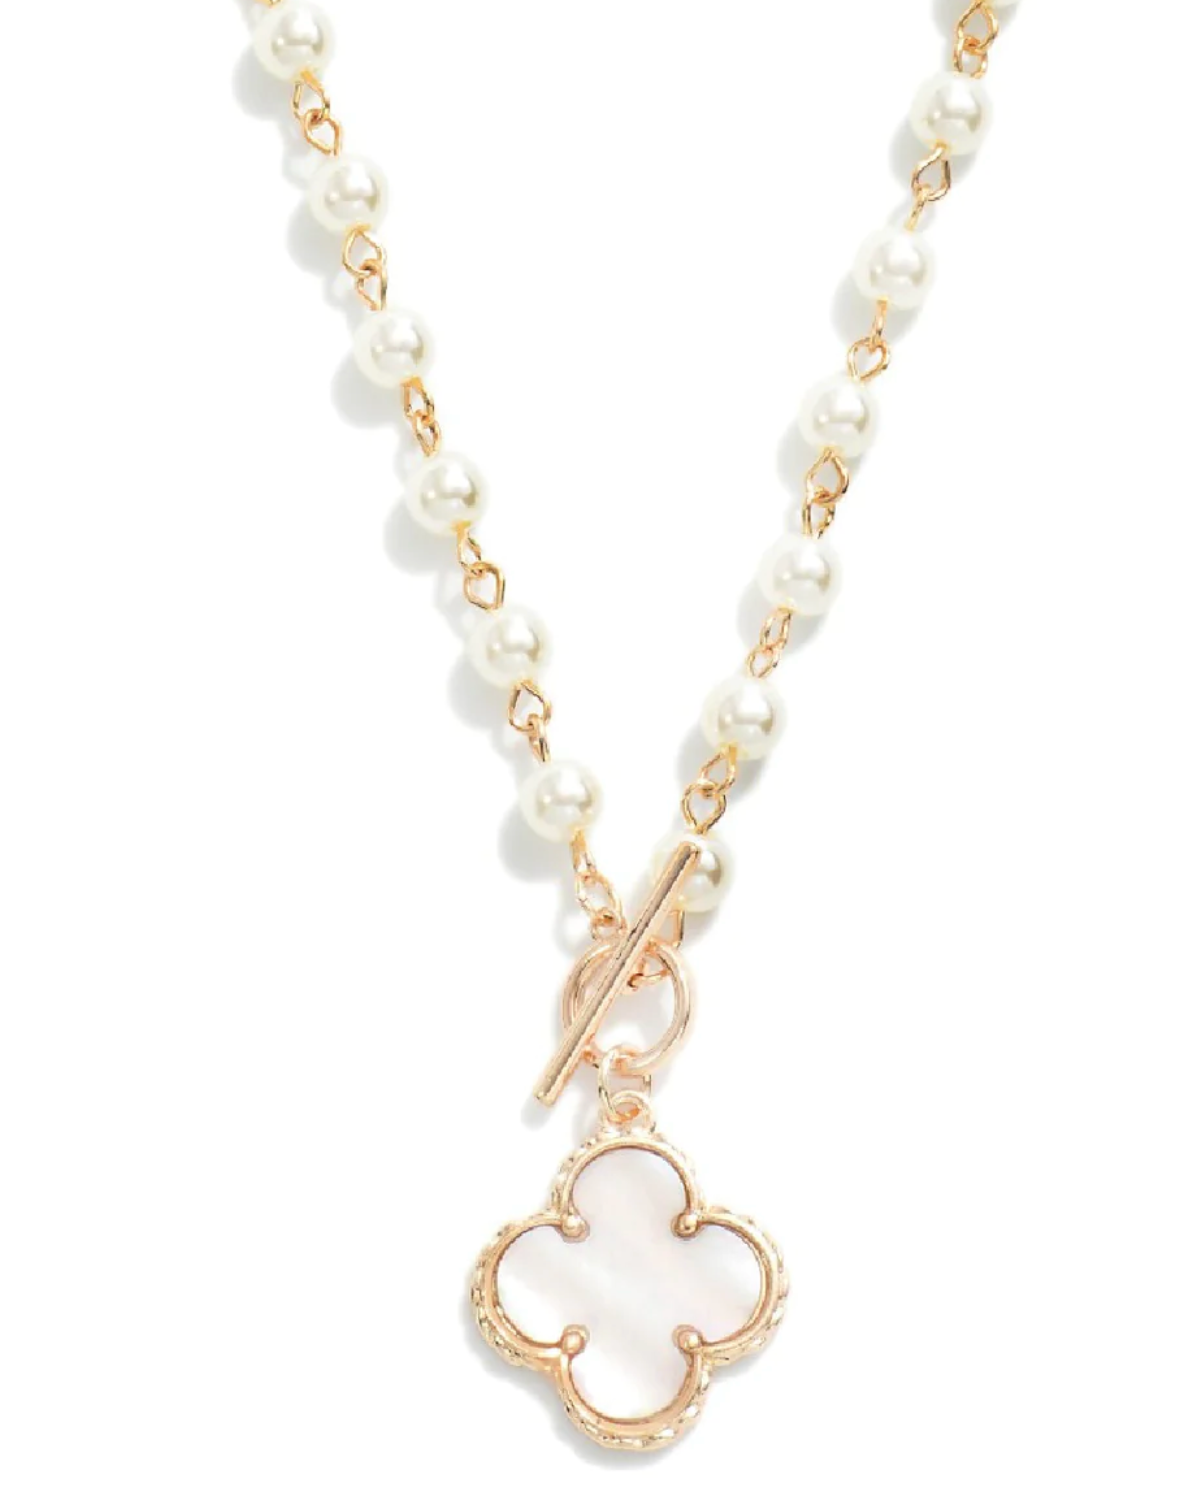 Mother Of Pearl Chain With Delicate Clover Toggle